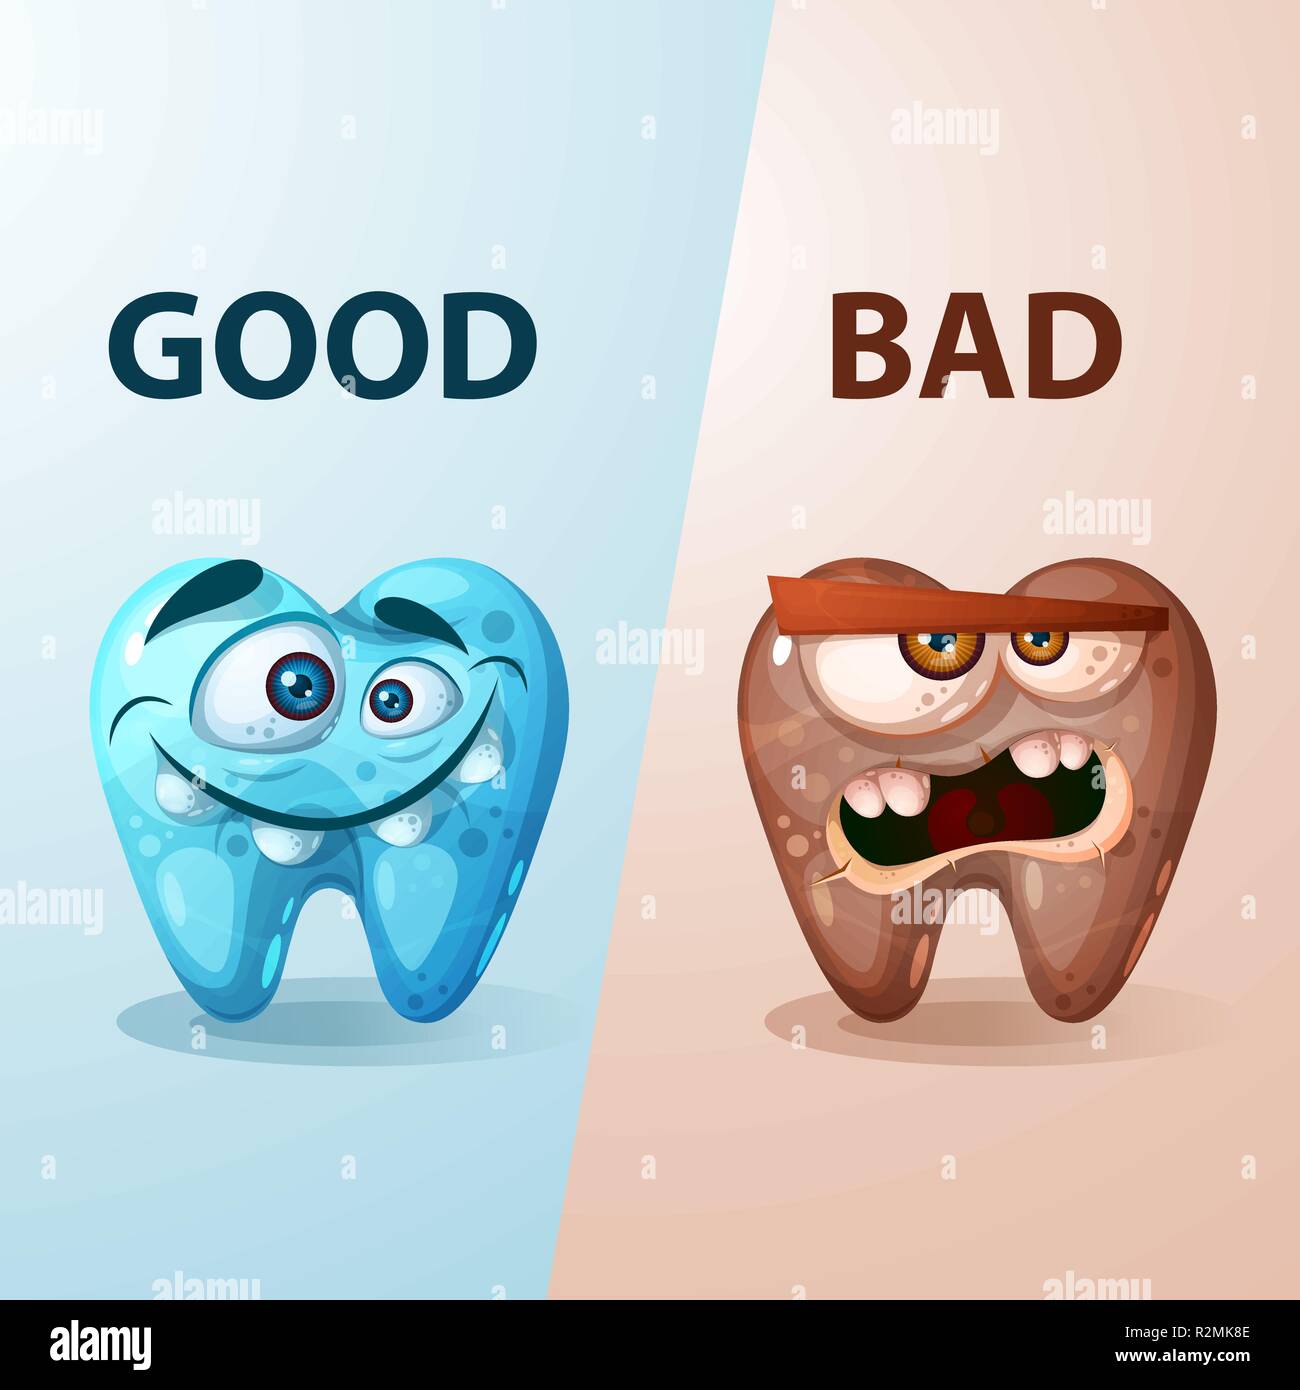 Good and bad tooth illustration. Stock Vector